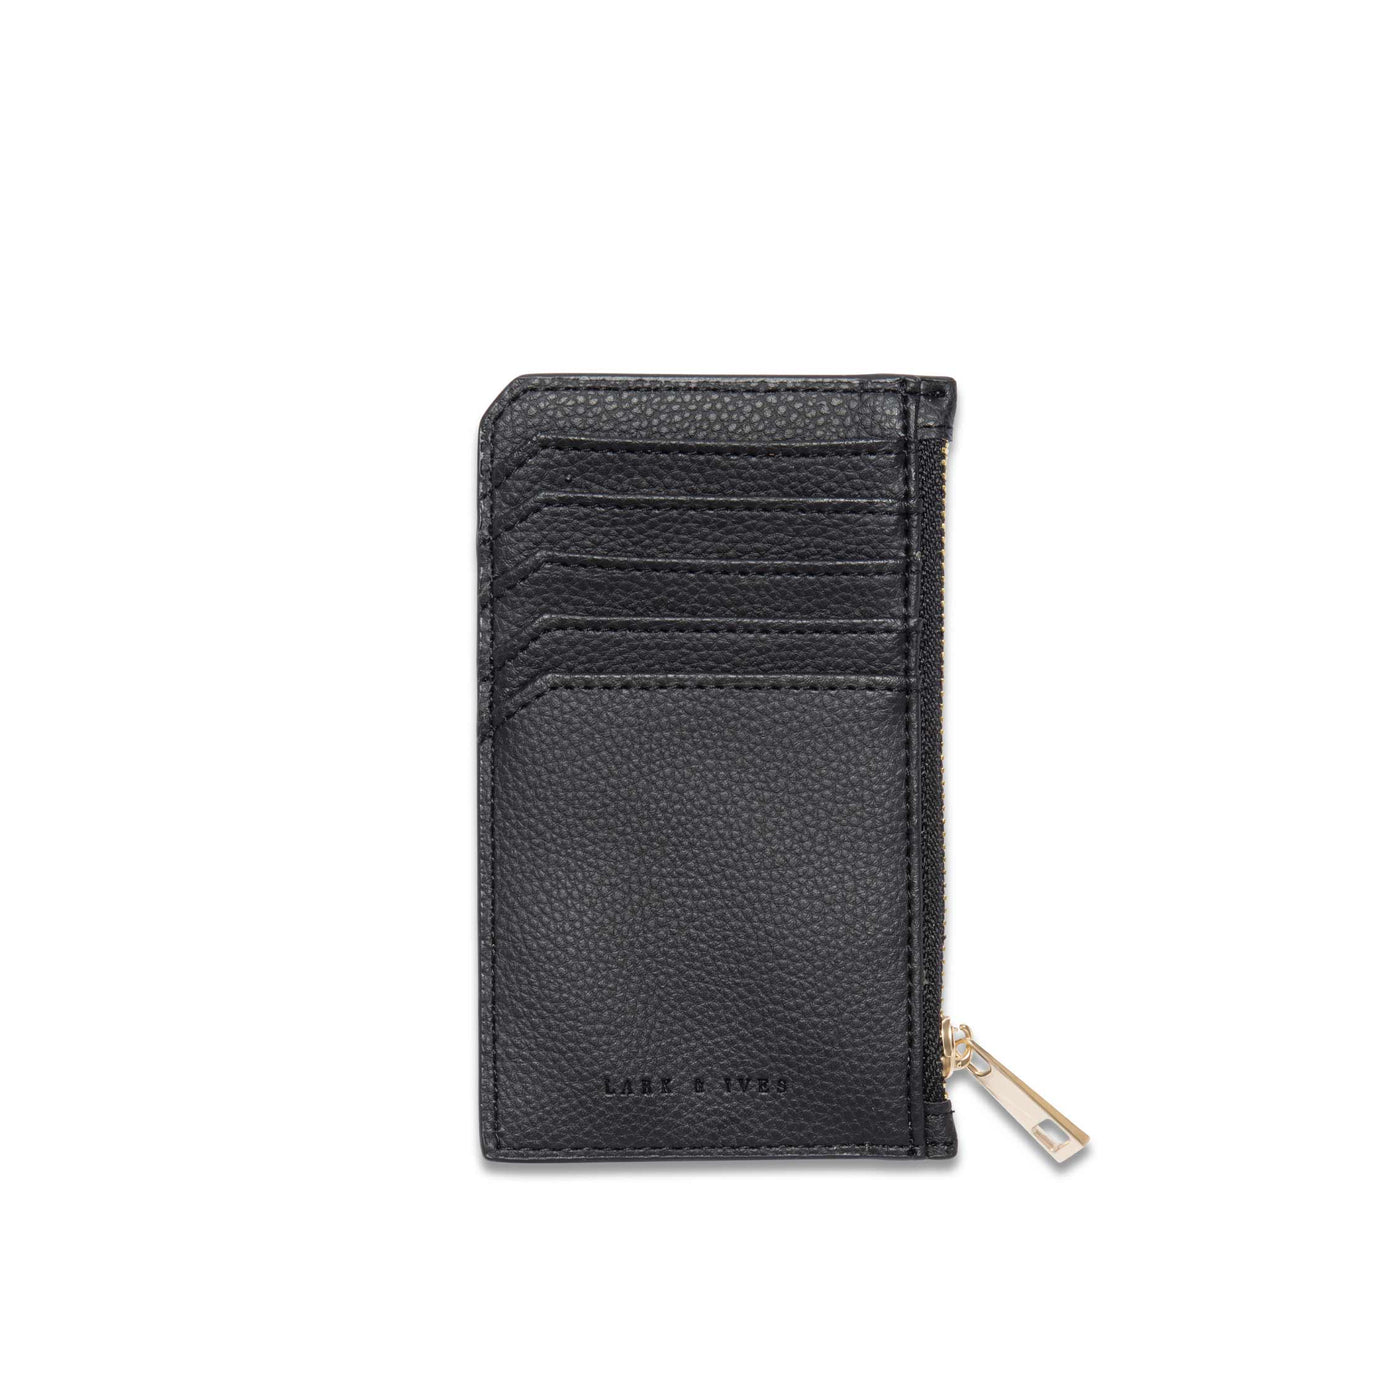 Lark and Ives / Vegan Leather Accessories / Small Accessories / Wallet / Mini Wallet / Card Case / Card Holder / Zippered Wallet / Zipper closure / Black